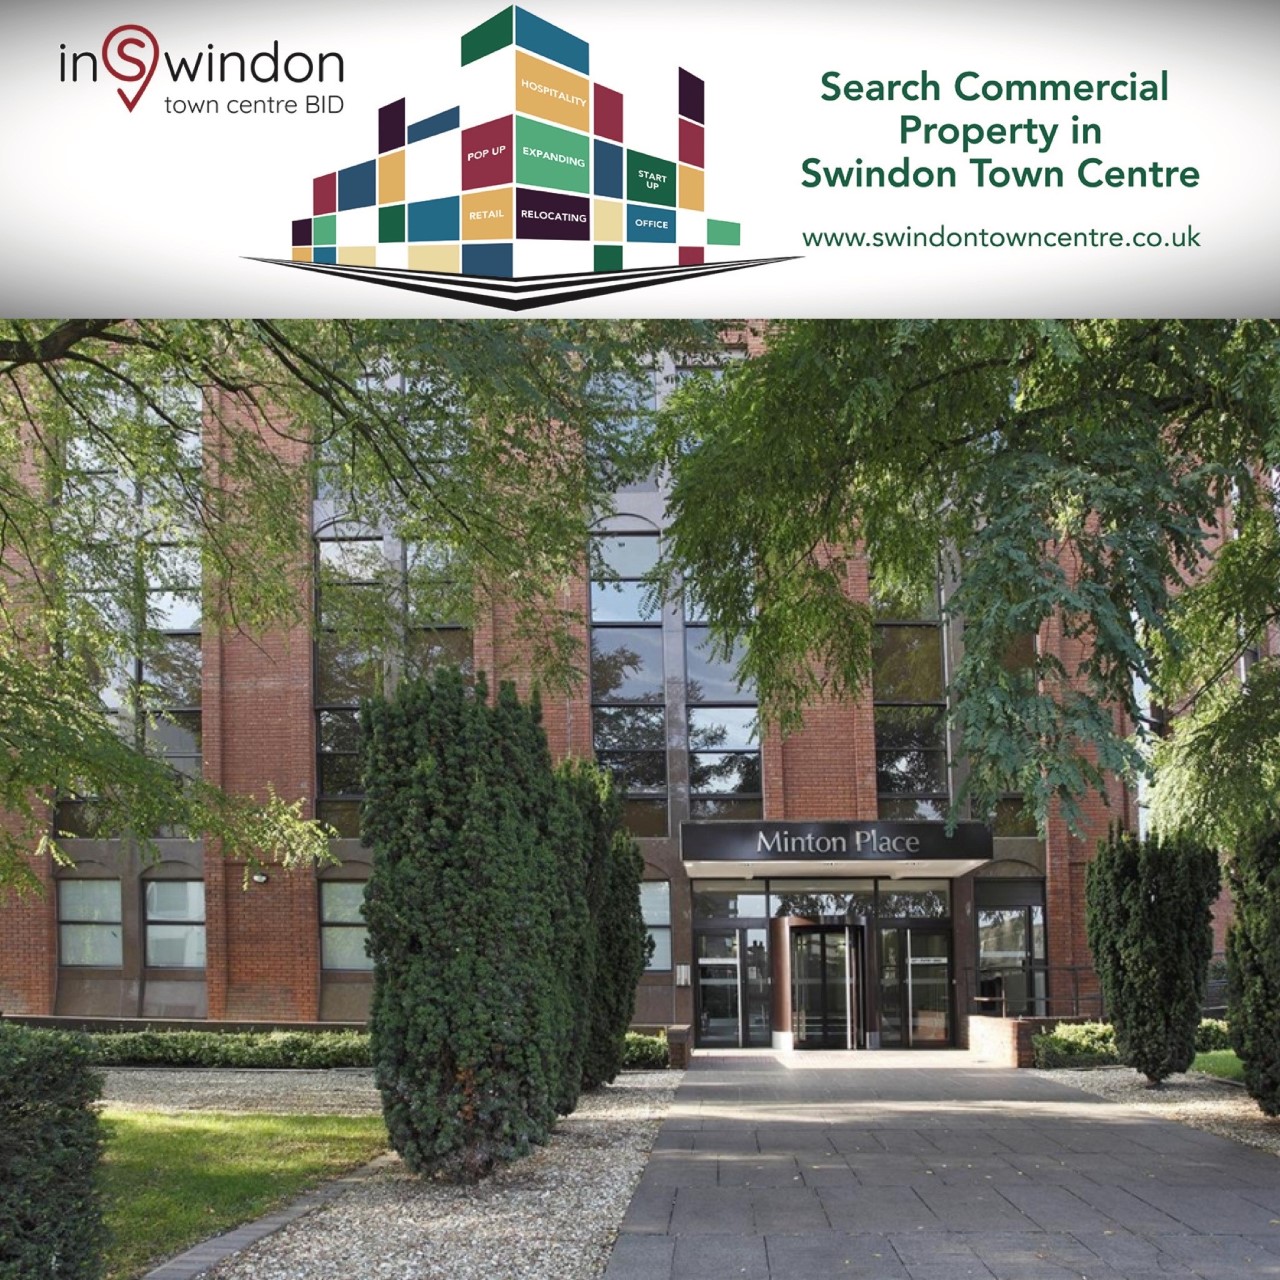 SWINDON TOWN CENTRE COMMERCIAL PROPERTY SEARCH PLATFORM LAUNCHED